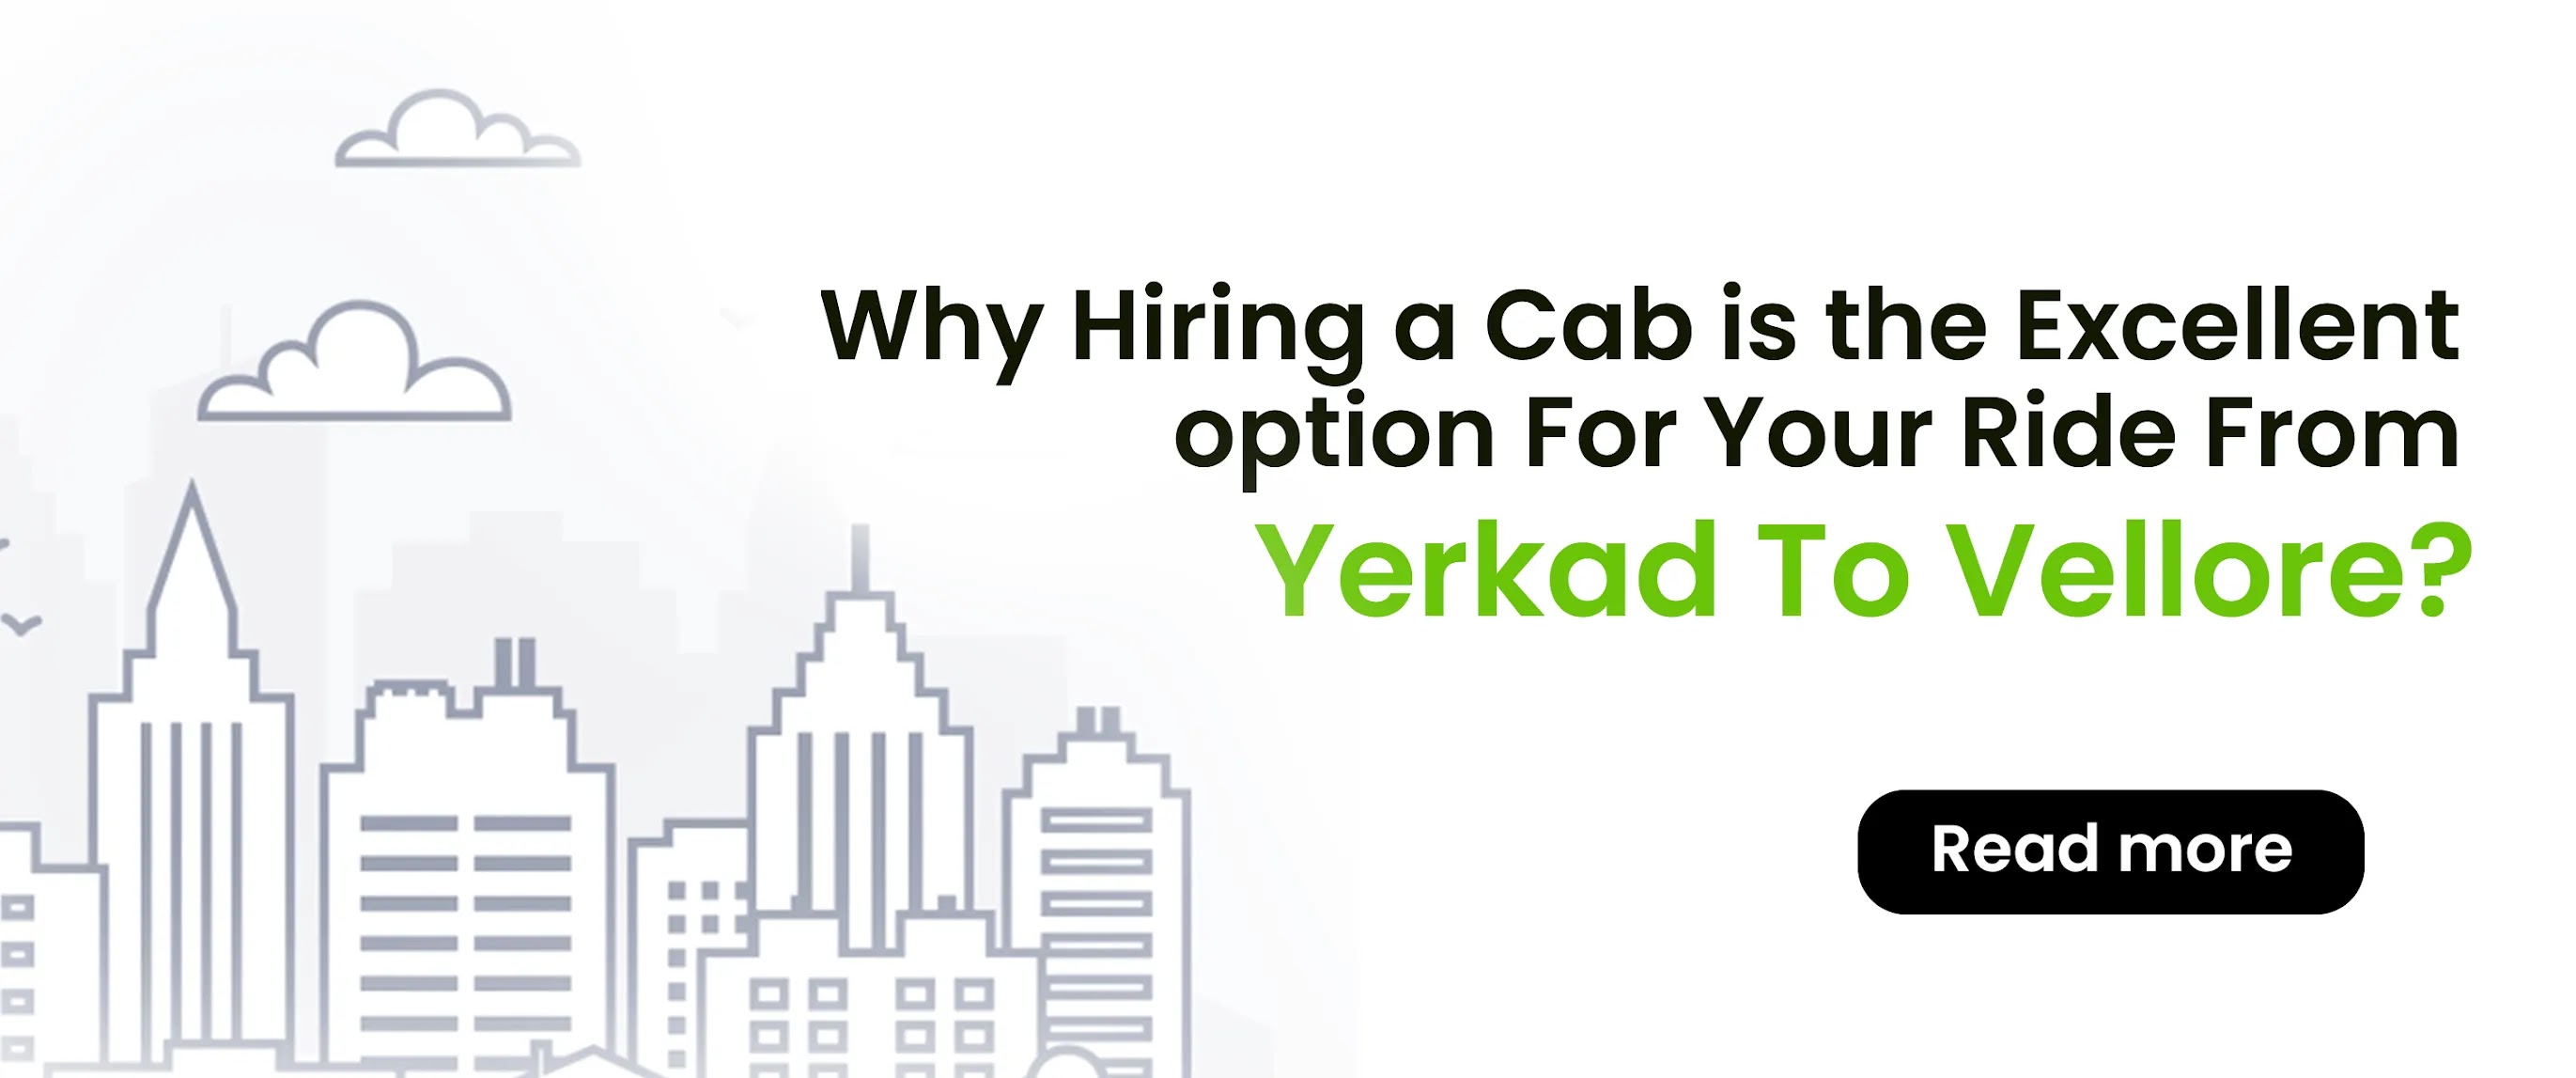 Why Hiring A Cab Is The Excellent Option For Your Ride From Yerkad To Vellore?